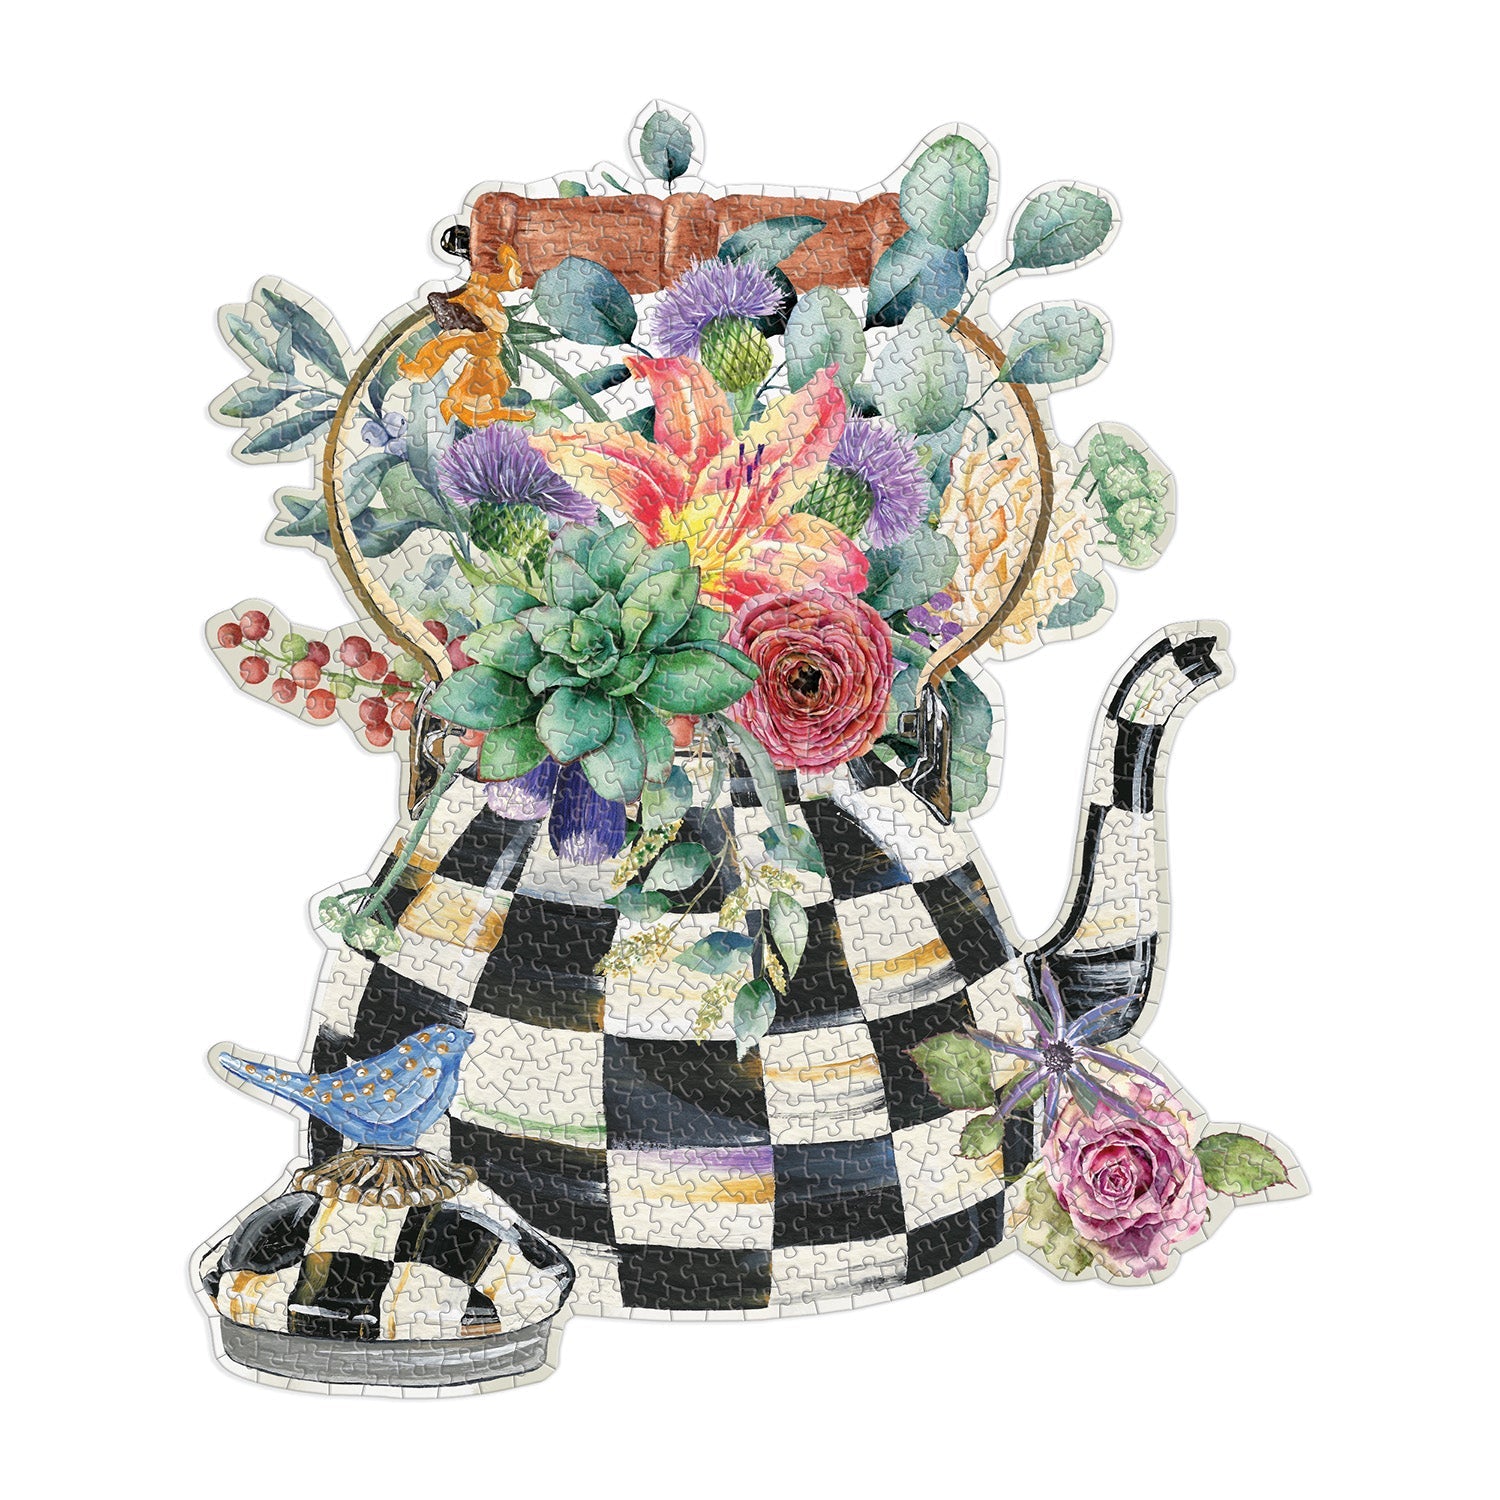 MacKenzie-Childs Blooming Kettle 750 Piece Shaped Puzzle